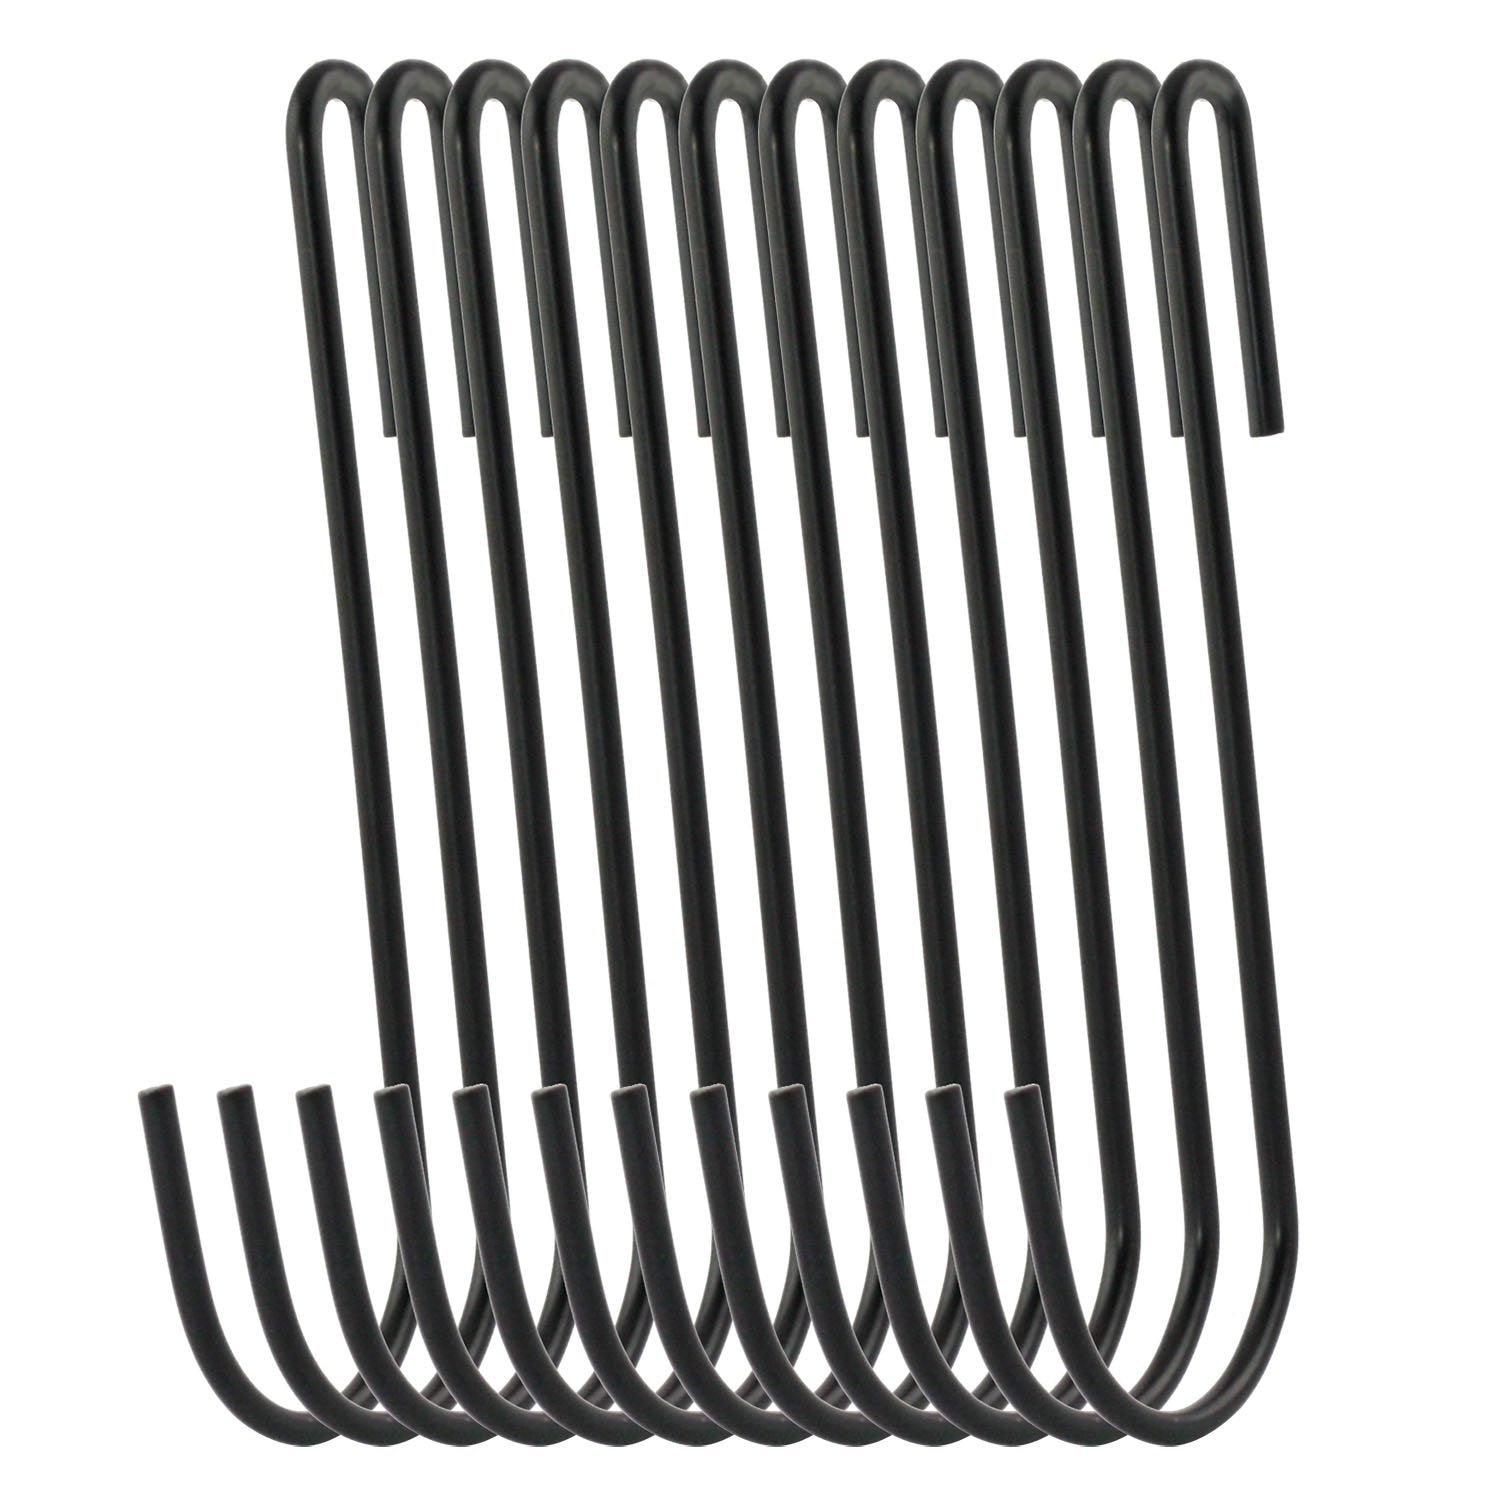 RuiLing 12-Pack 4.2 Inches Black Antistatic coating Steel S hook Cookware Universal Pot Rack Hooks Sturdy Hanging Hooks - Multiple uses for Kitchenware, Pots, Utensils, Plants, Towels